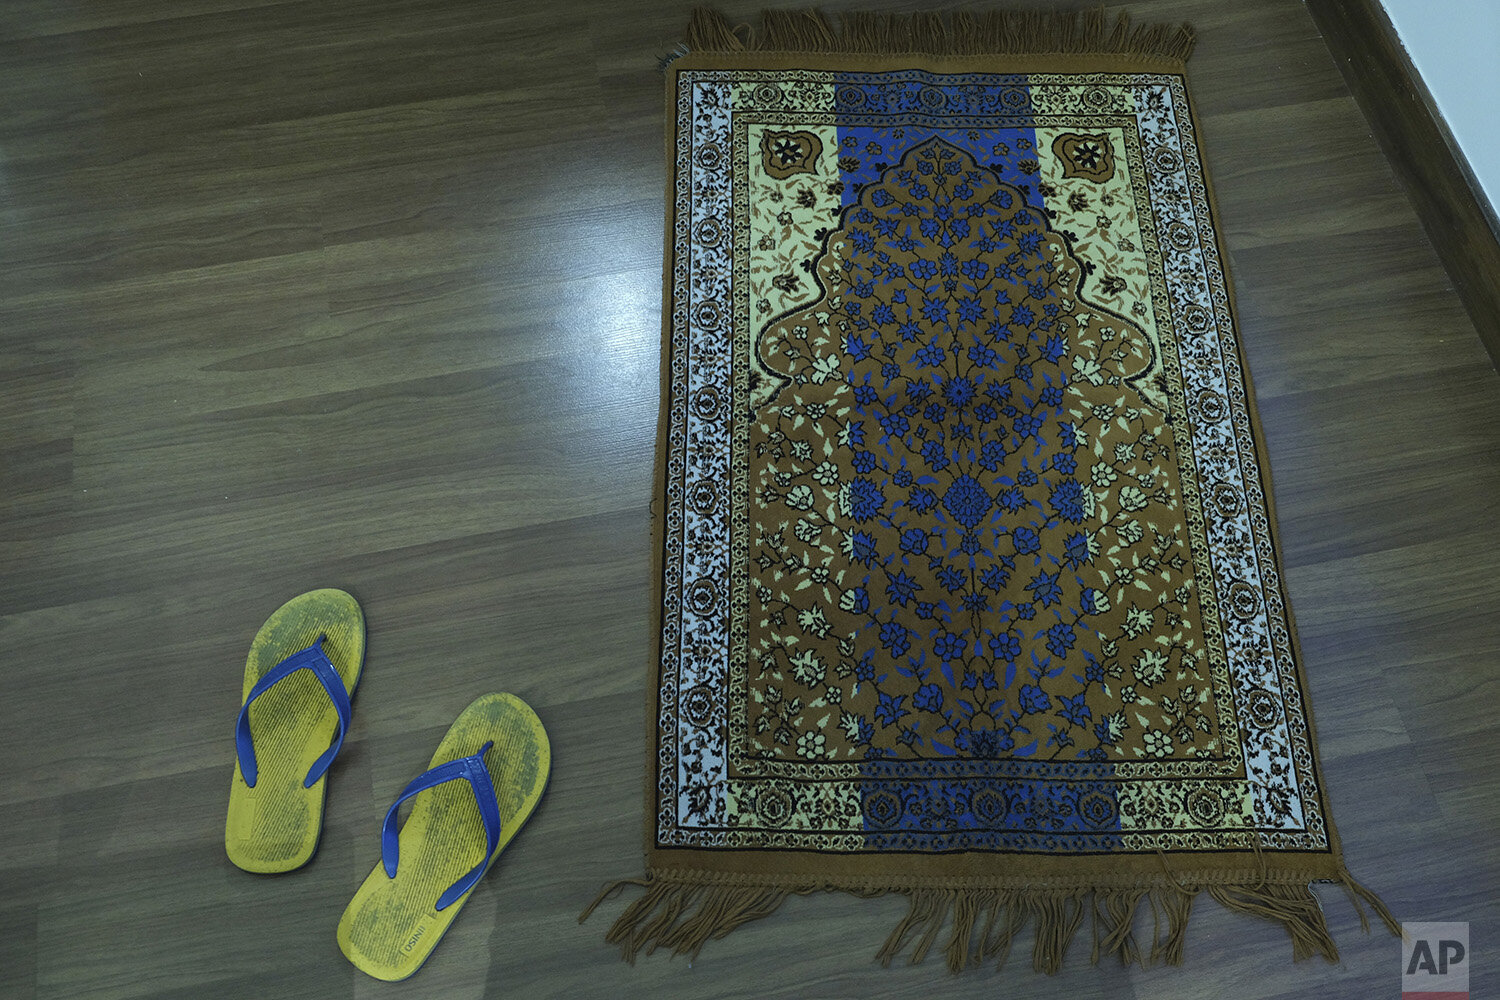  In this photo taken on April 24, 2020, photo, a pair of sandals lie near a prayer mat in the hotel room of Associated Press photographer Rafiq Maqbool, where he was being quarantined, in Mumbai, India. Maqbool was tested positive for COVID-19 with d